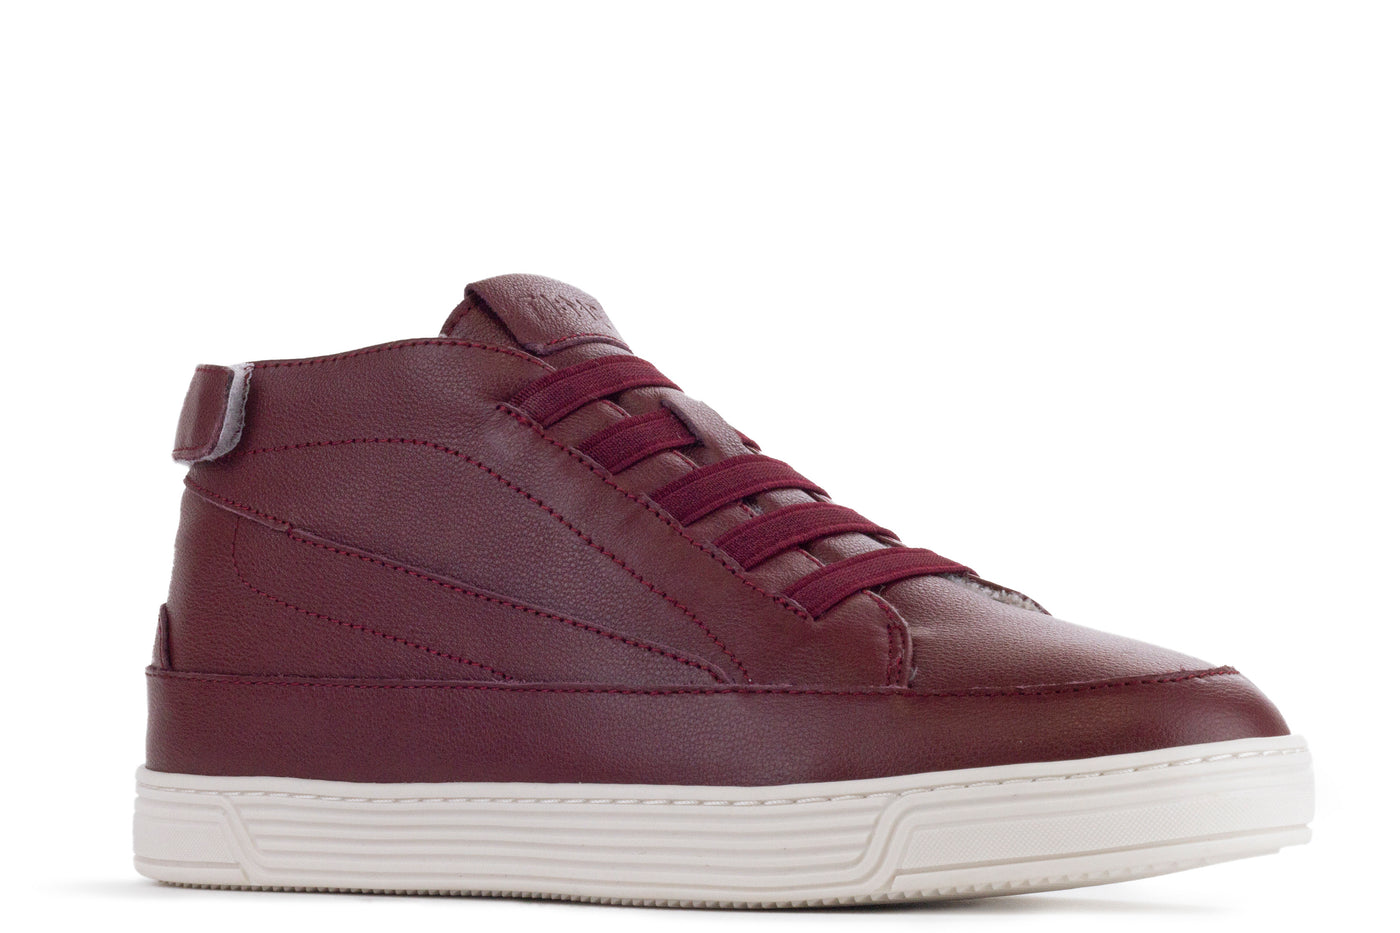 TIME Slippers-Women's Mid-top Slippers, #color_leather-burgundy